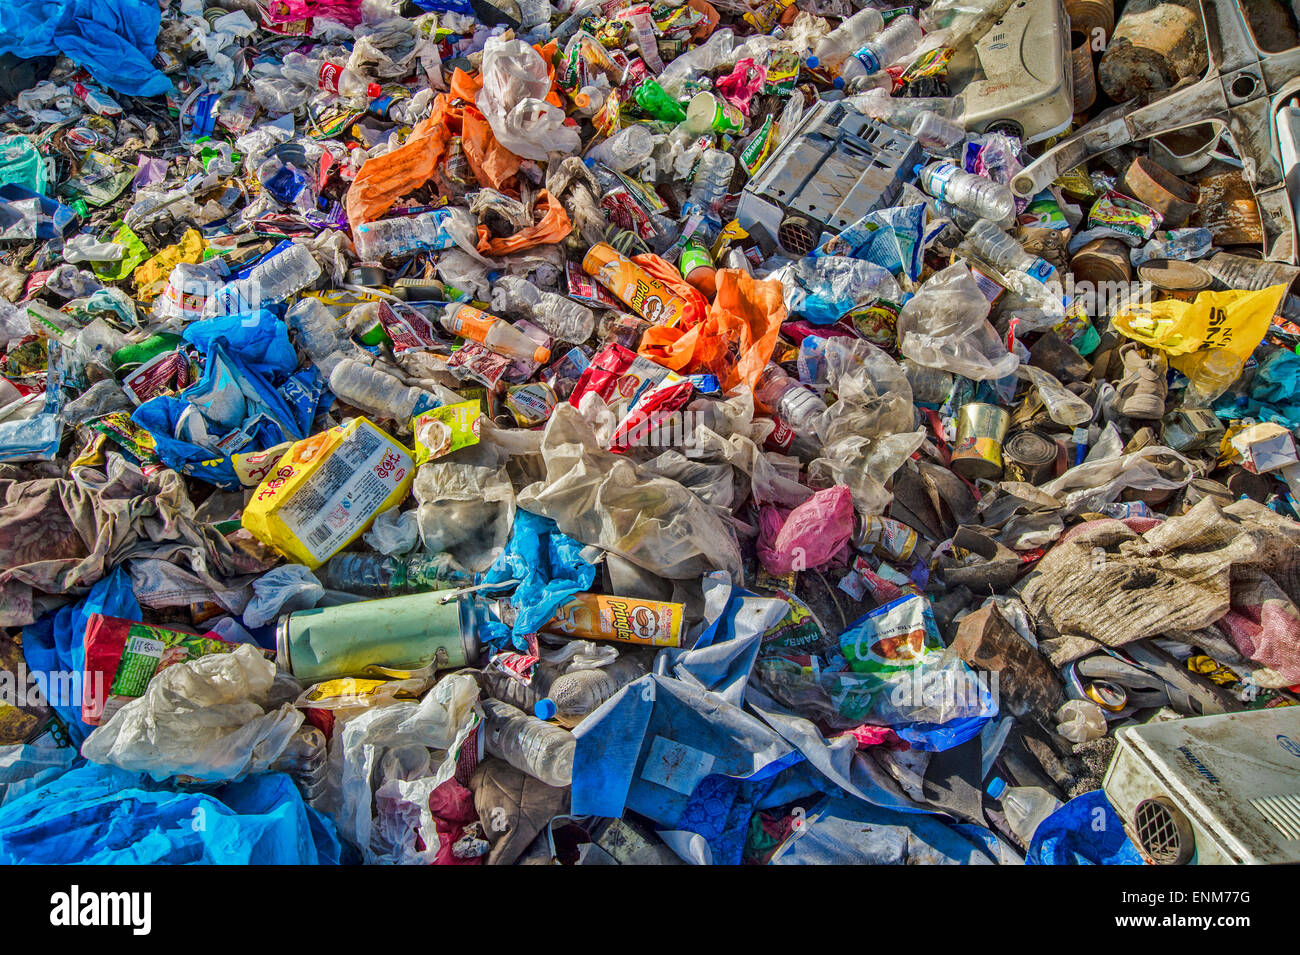 Garbage Dump in the Himalayas, Nepal Stock Photo